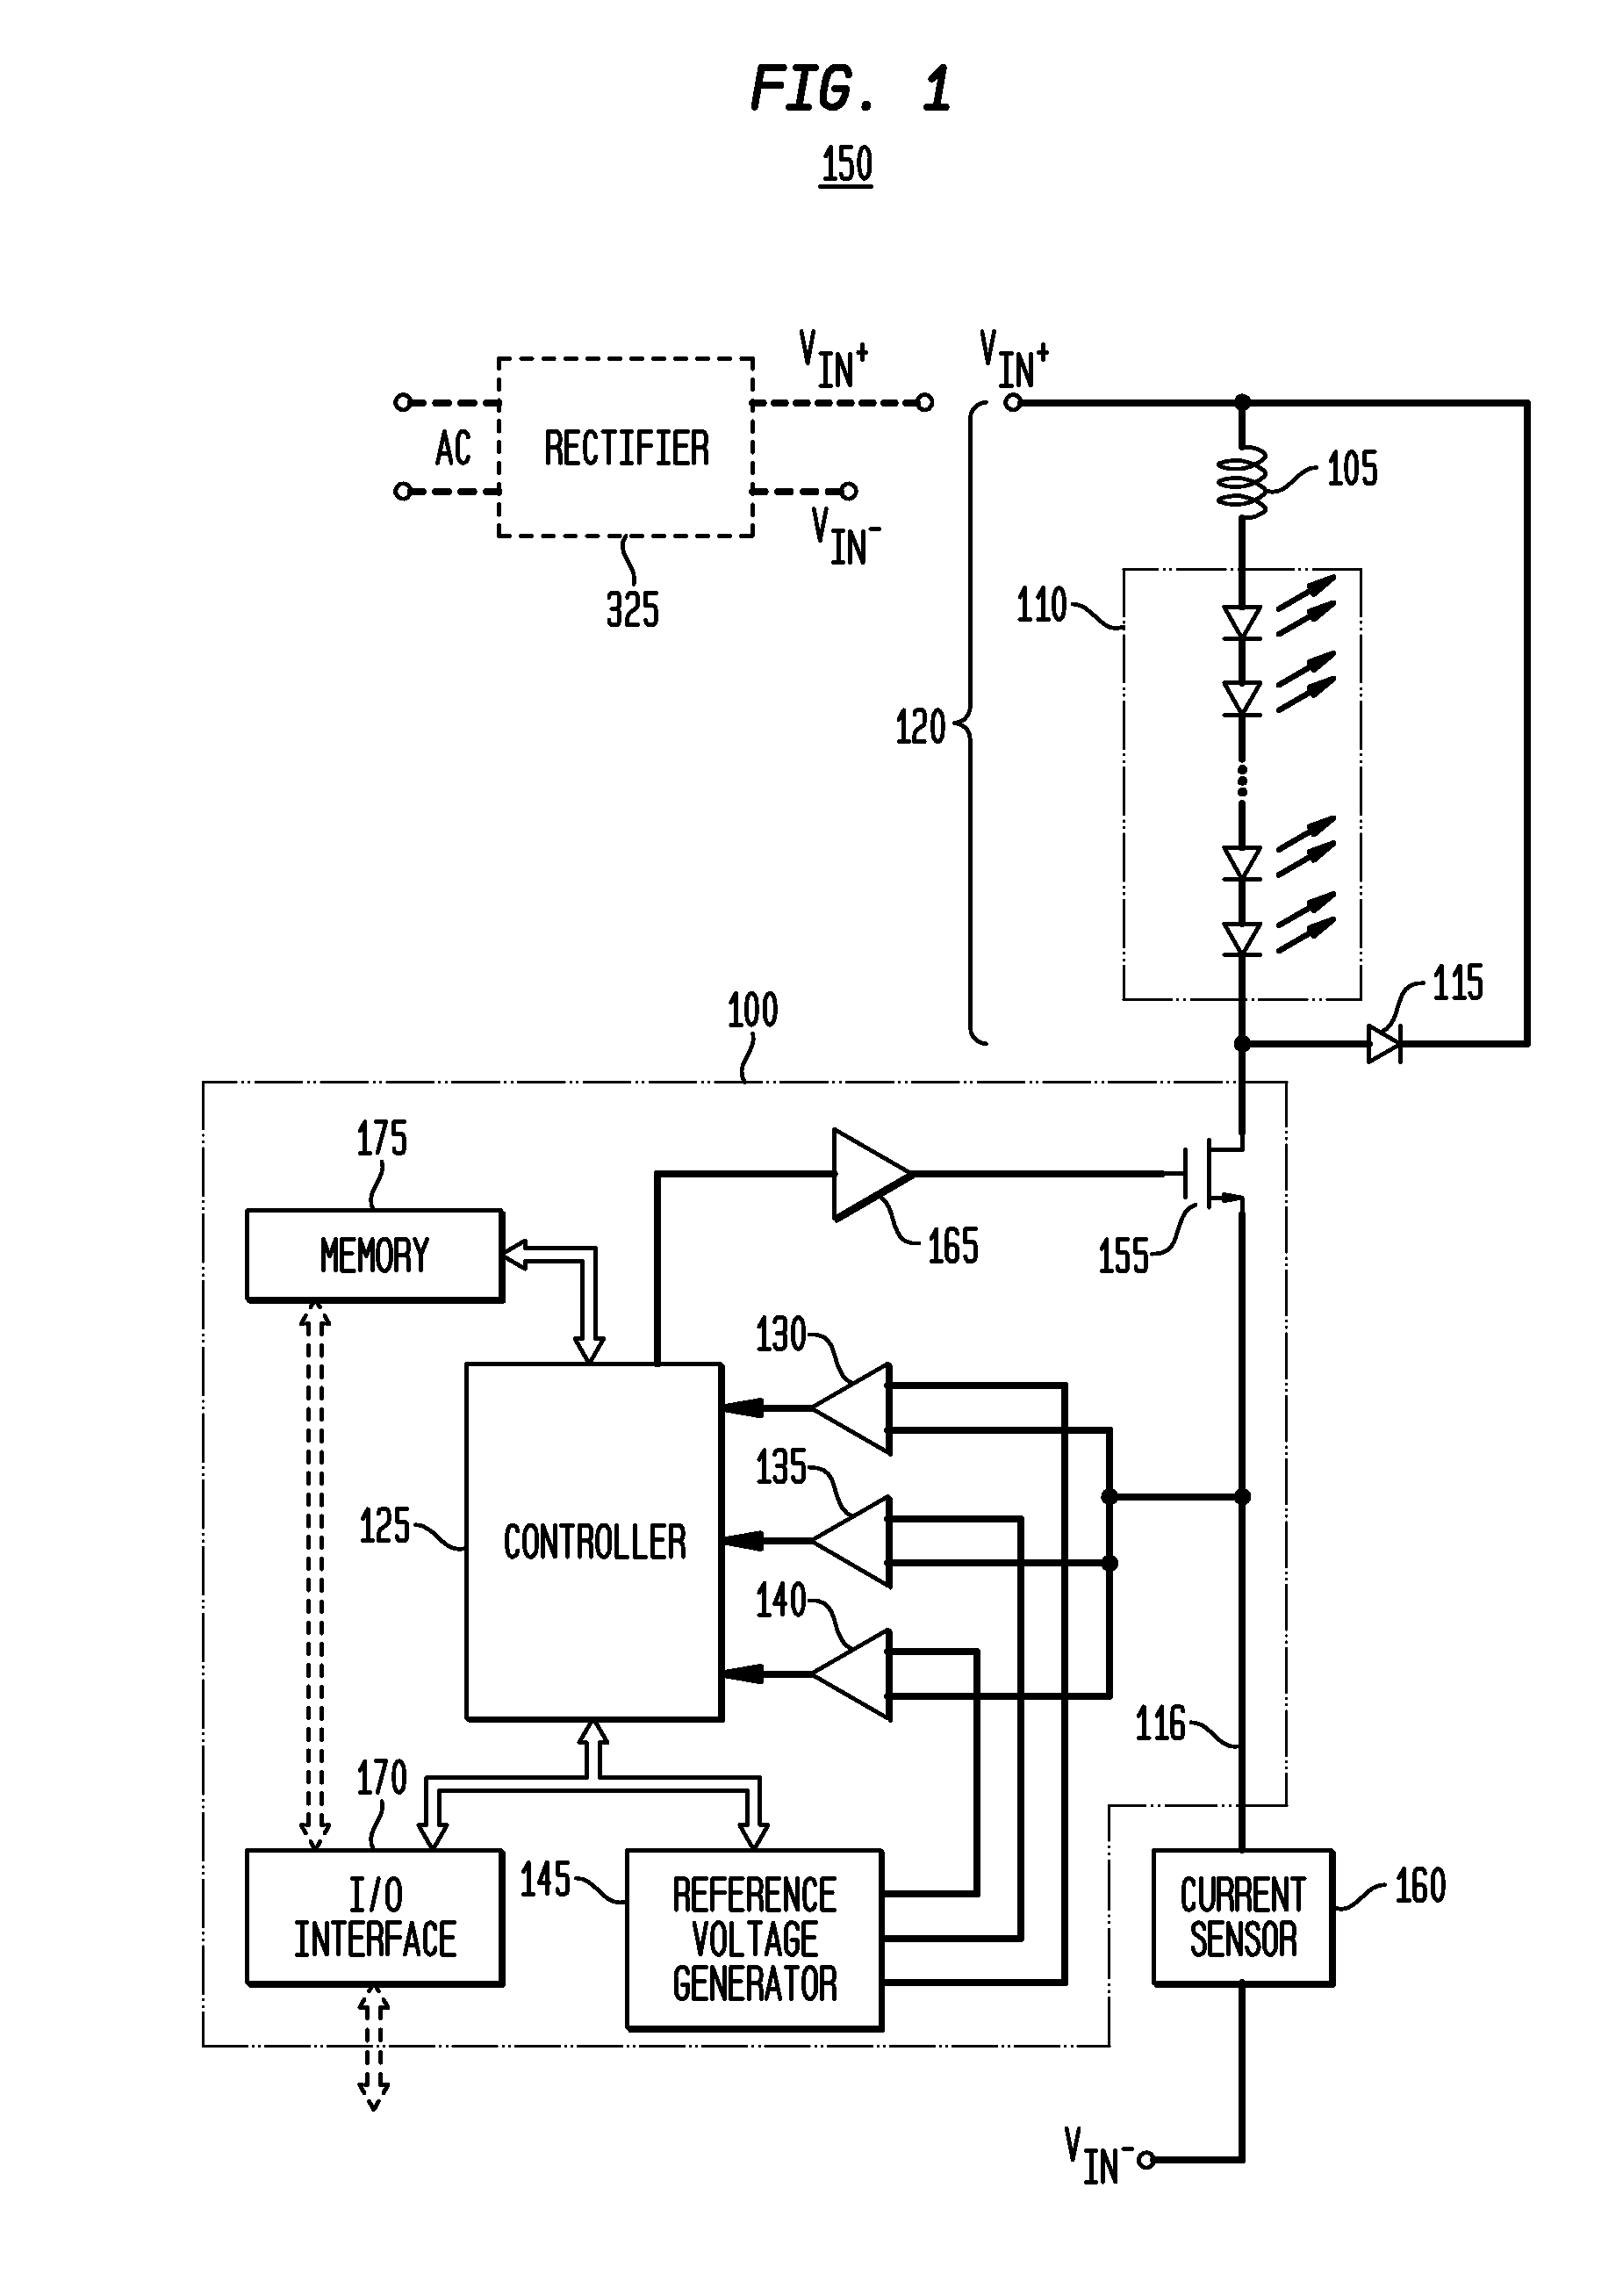 Digital Driver Apparatus, Method and System for Solid State Lighting